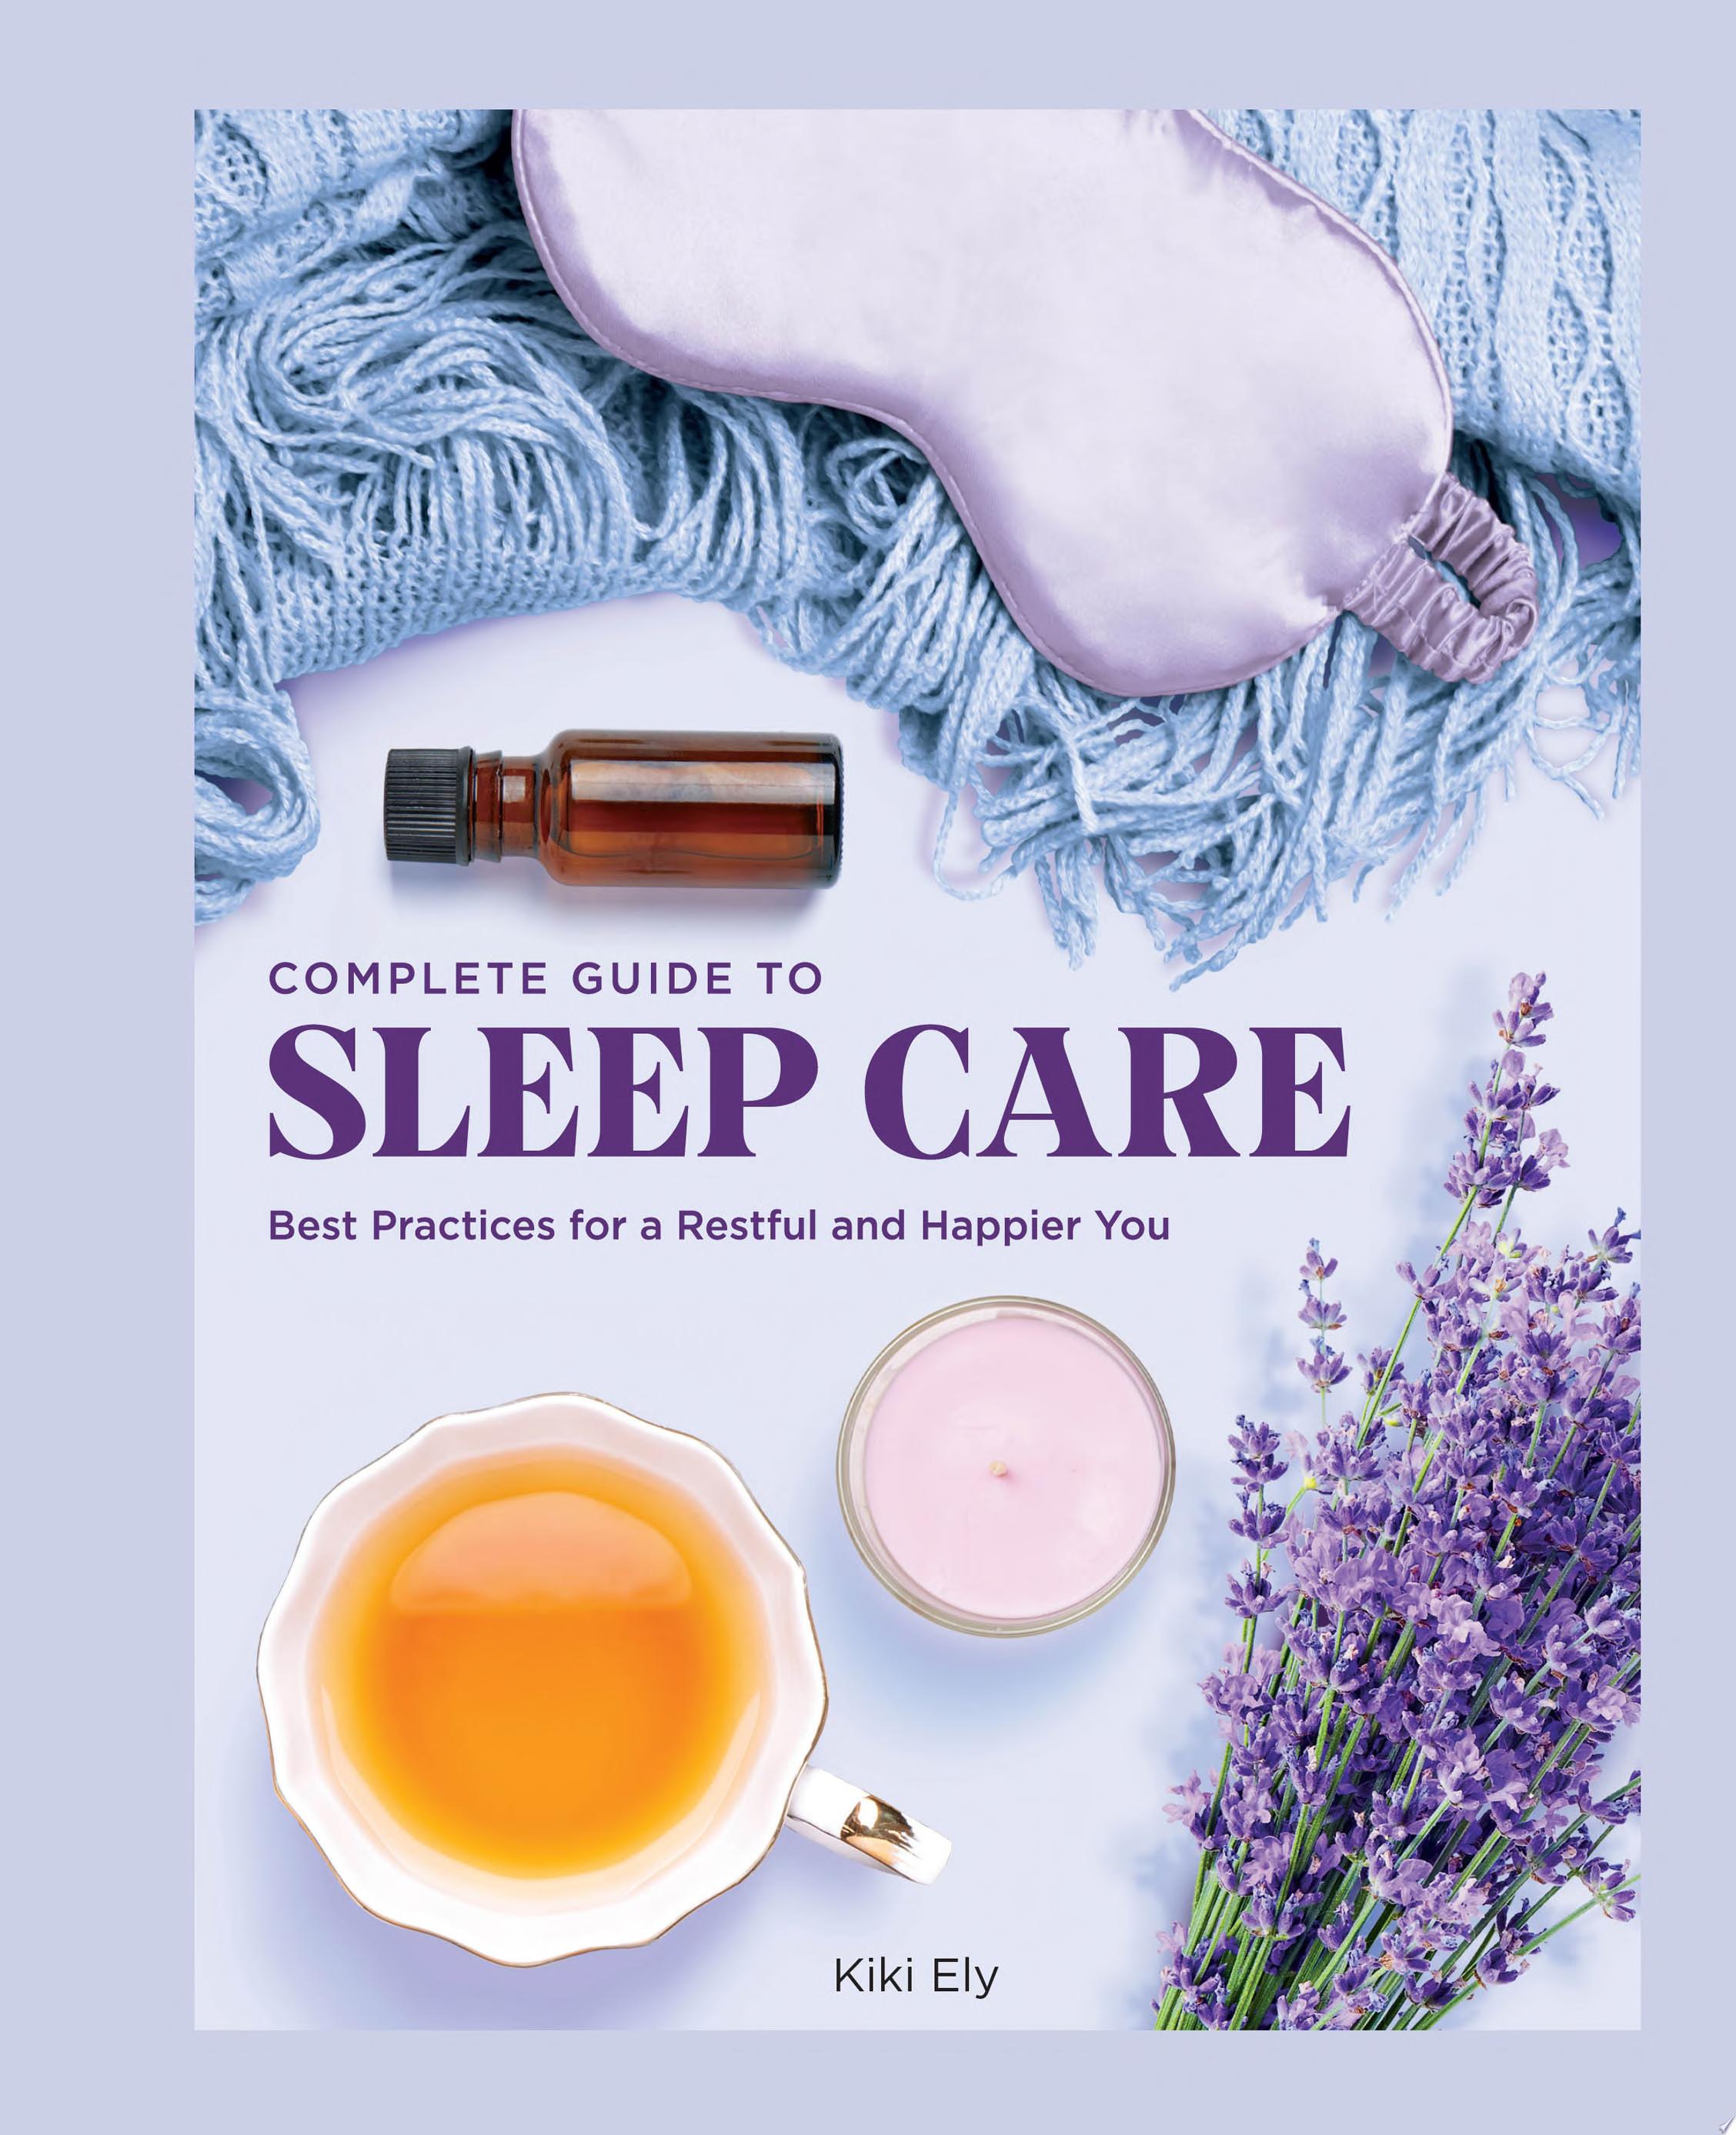 Image for "Complete Guide to Sleep Care"